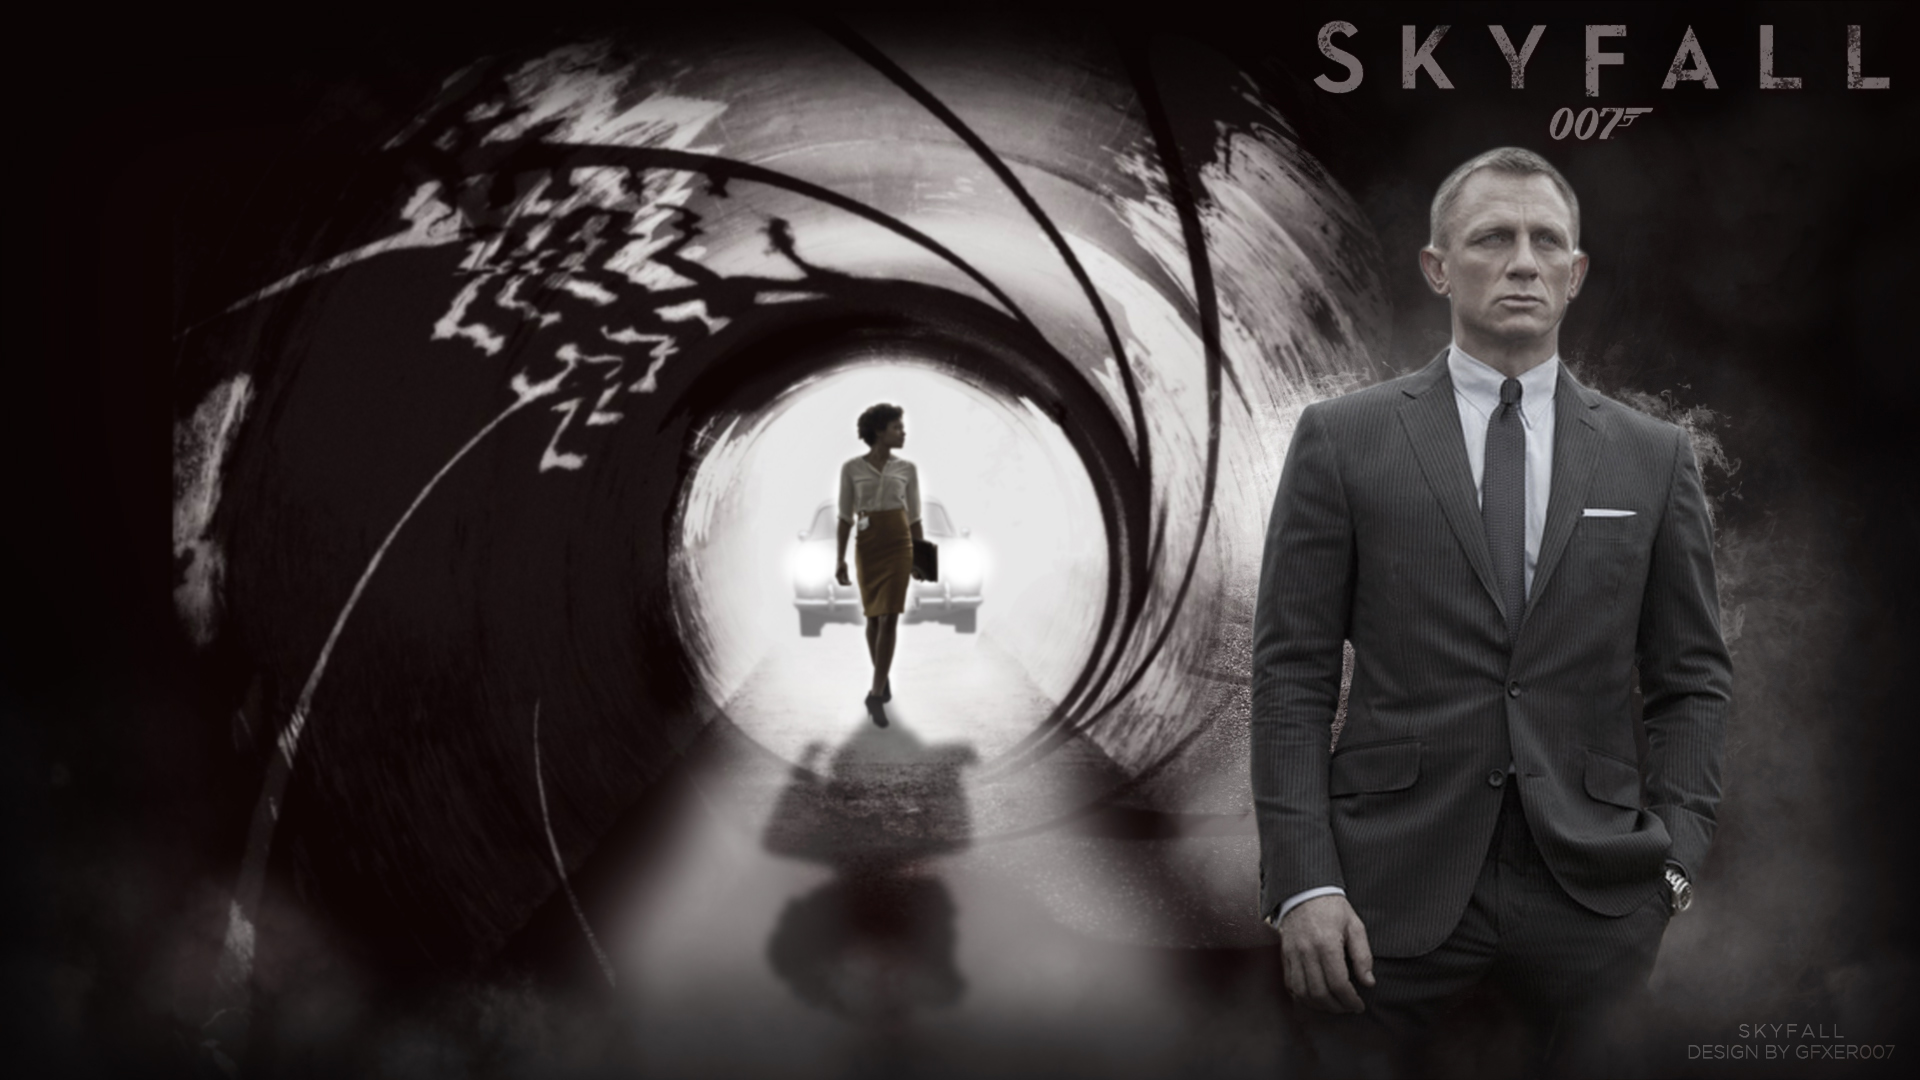 free Skyfall for iphone download